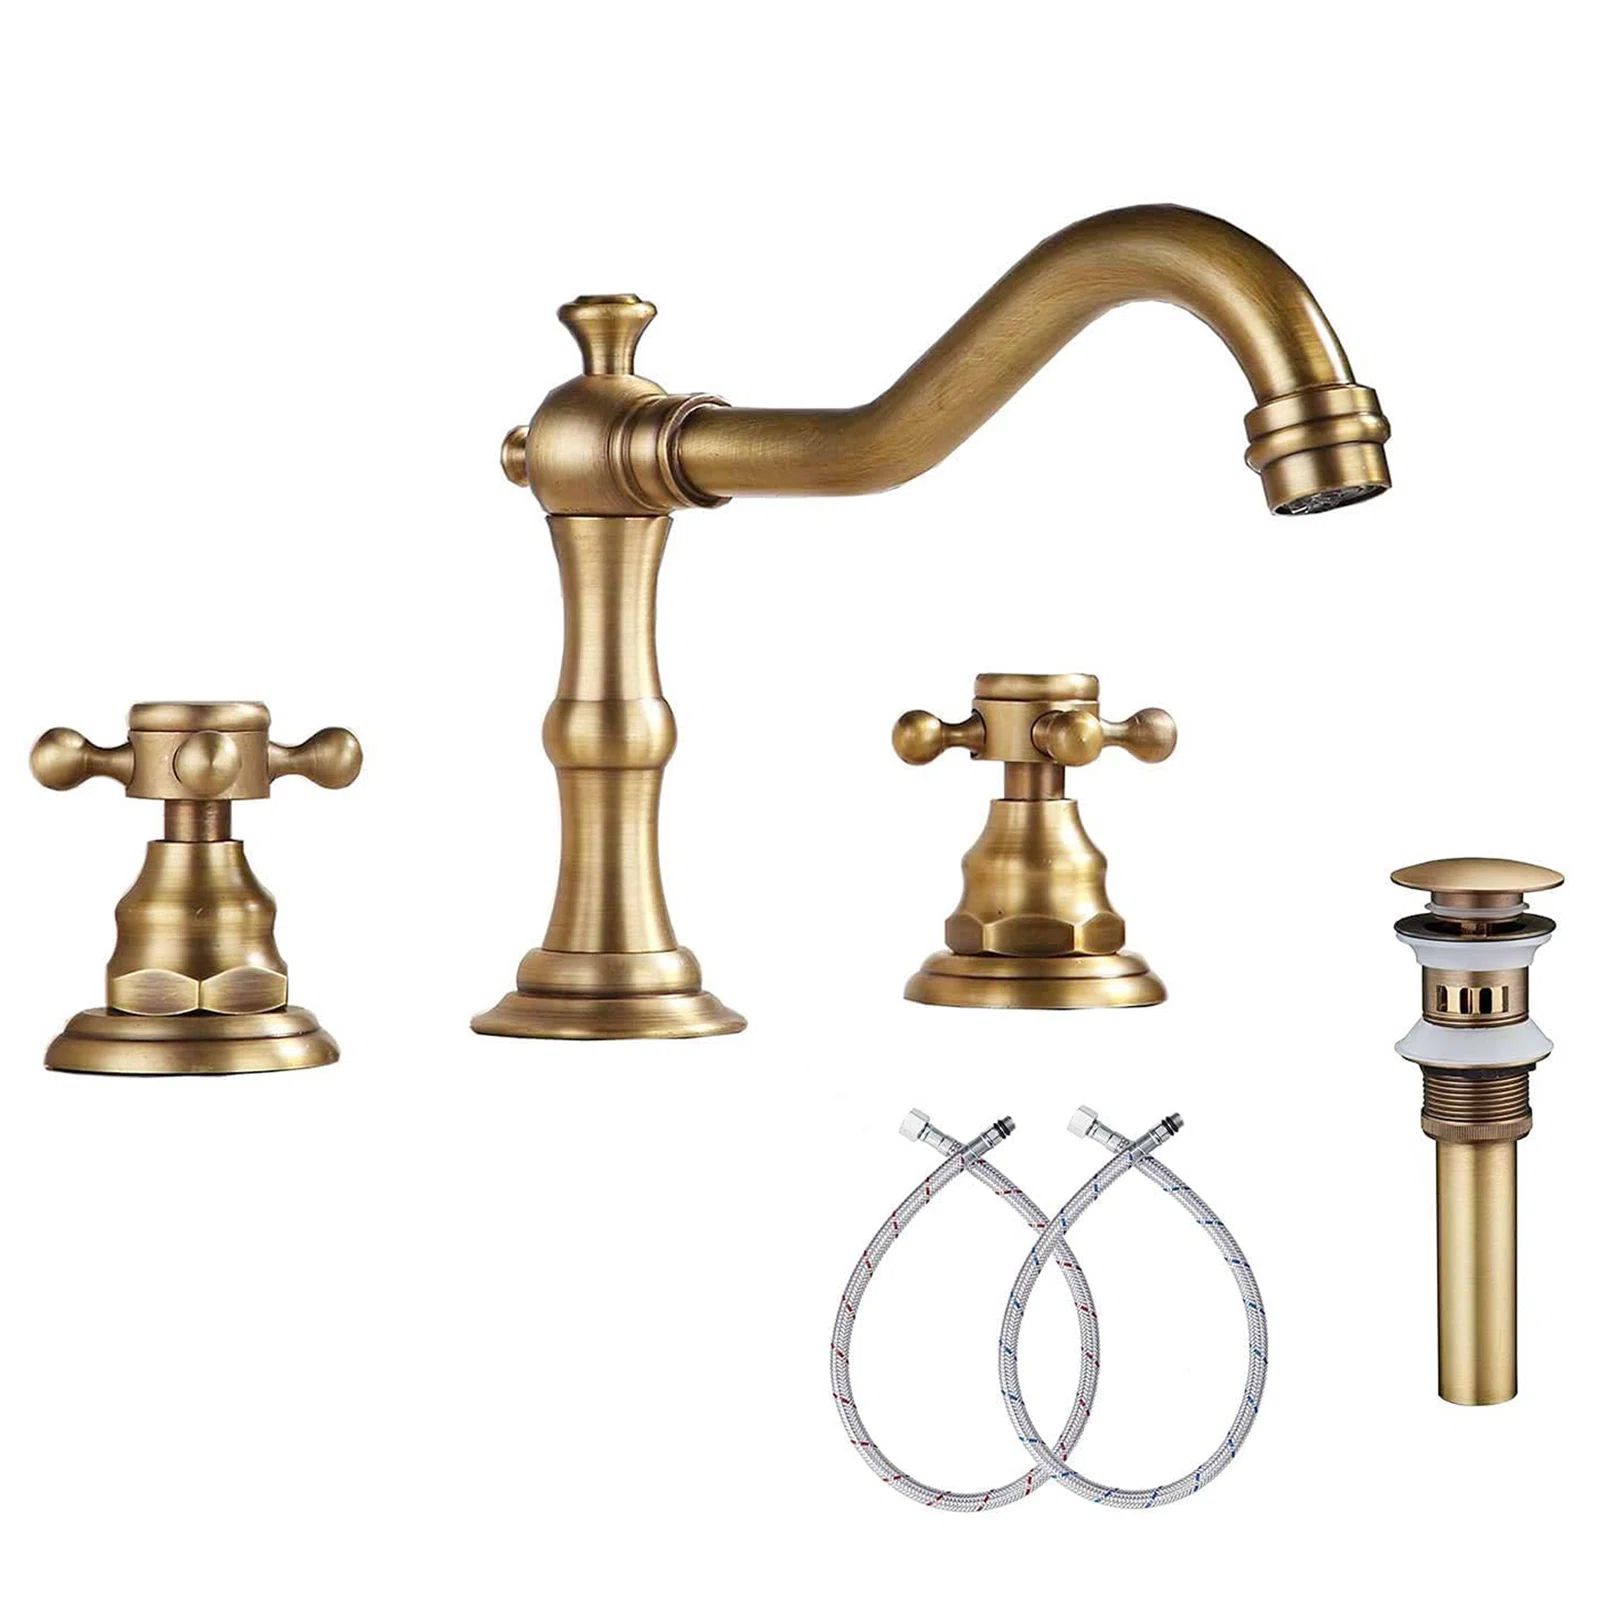 ‎P-16389-ati Widespread Bathroom Faucet with Drain Assembly | Wayfair North America